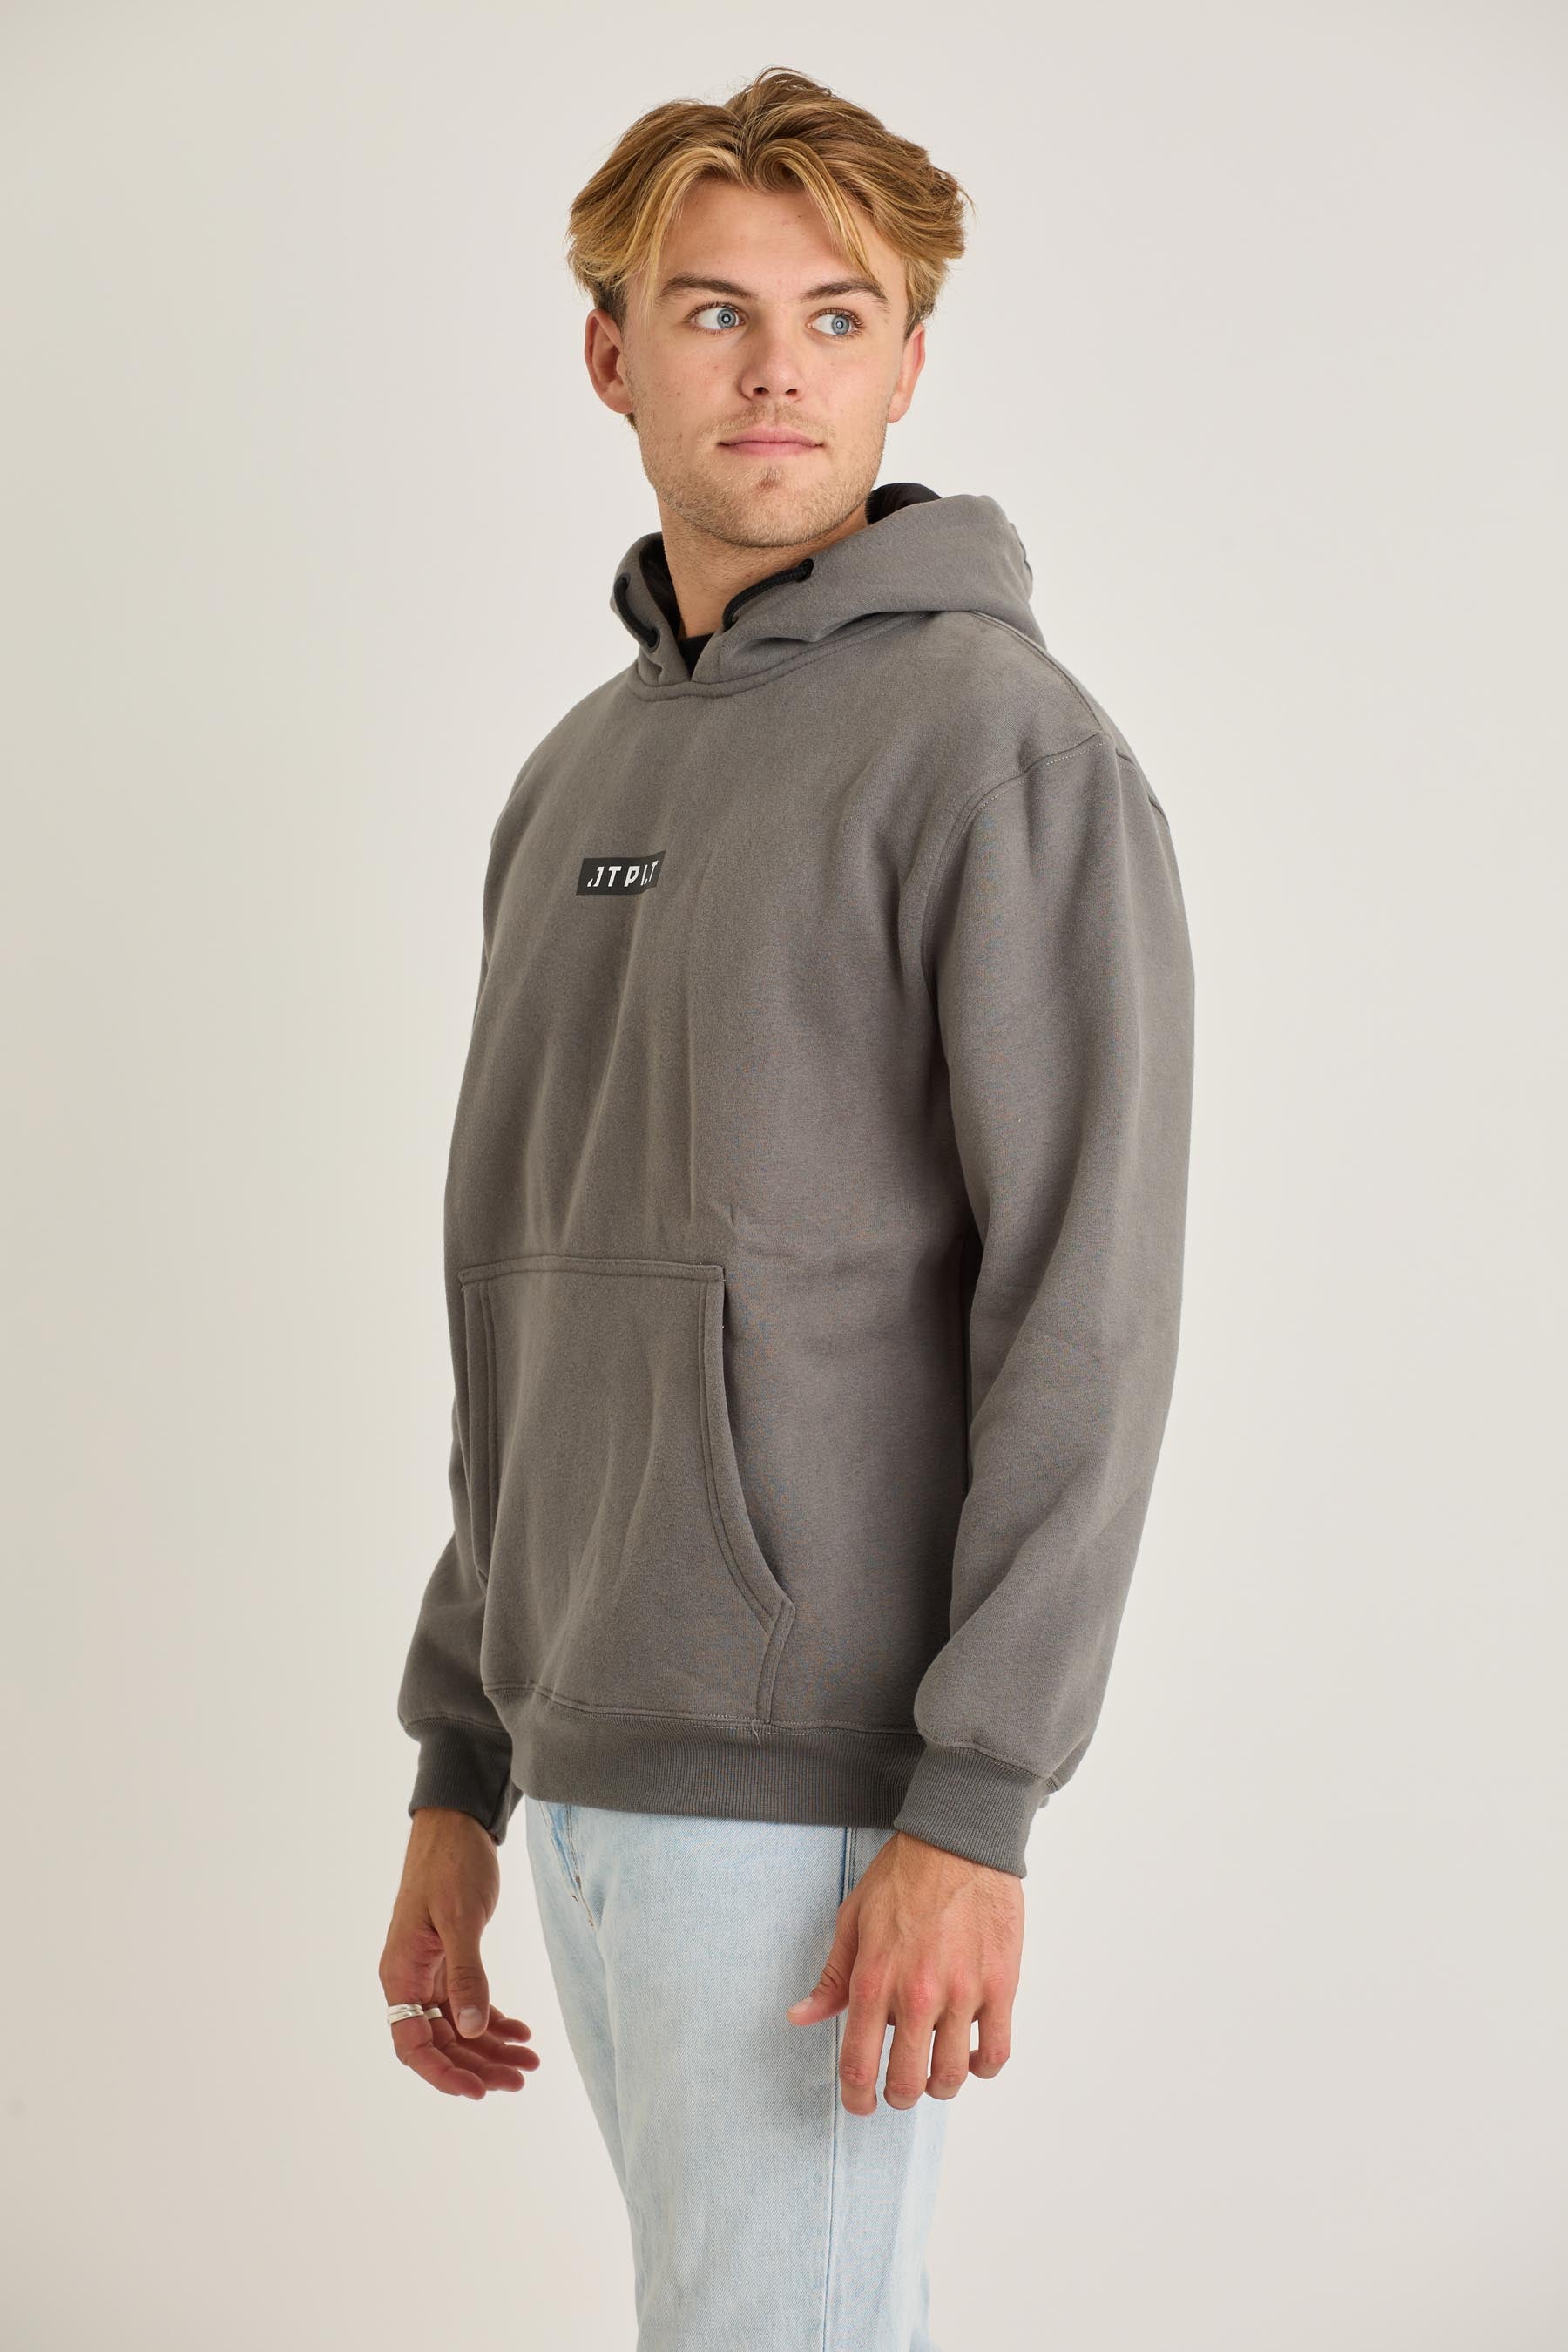 Jetpilot Corp Mens Pullover - Charcoal 4